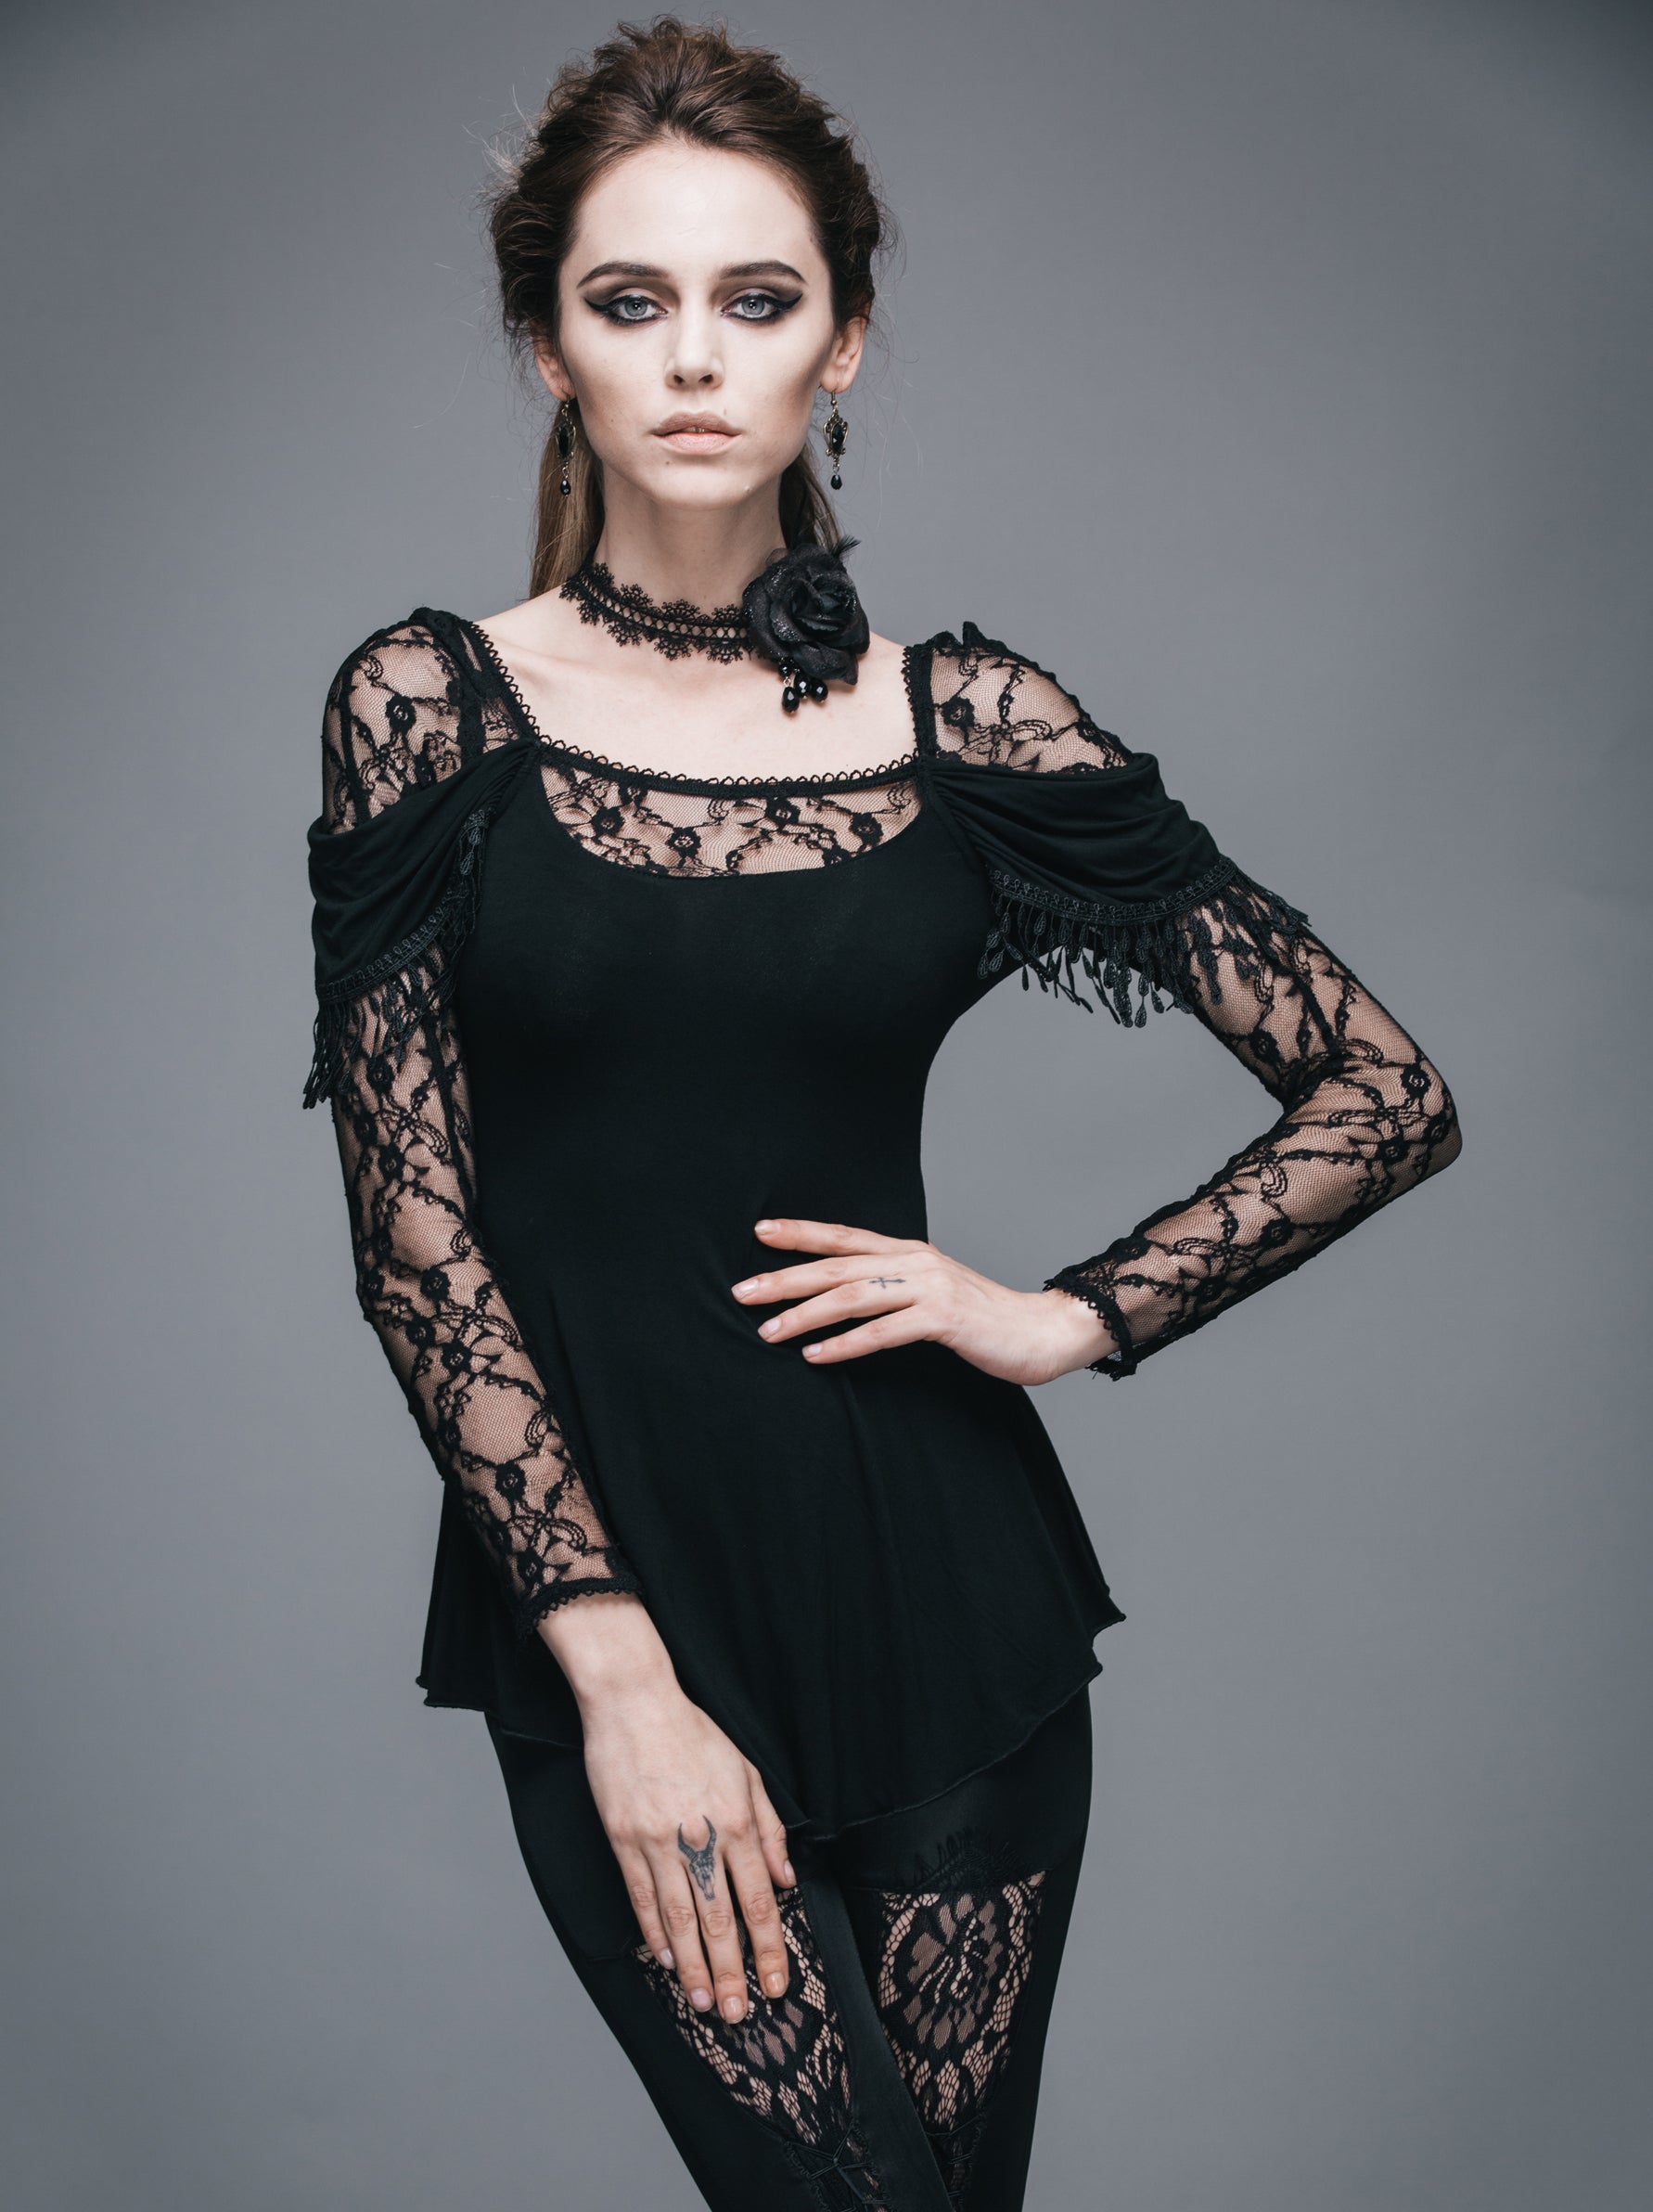 The Lace of Romance Top - Goth Mall